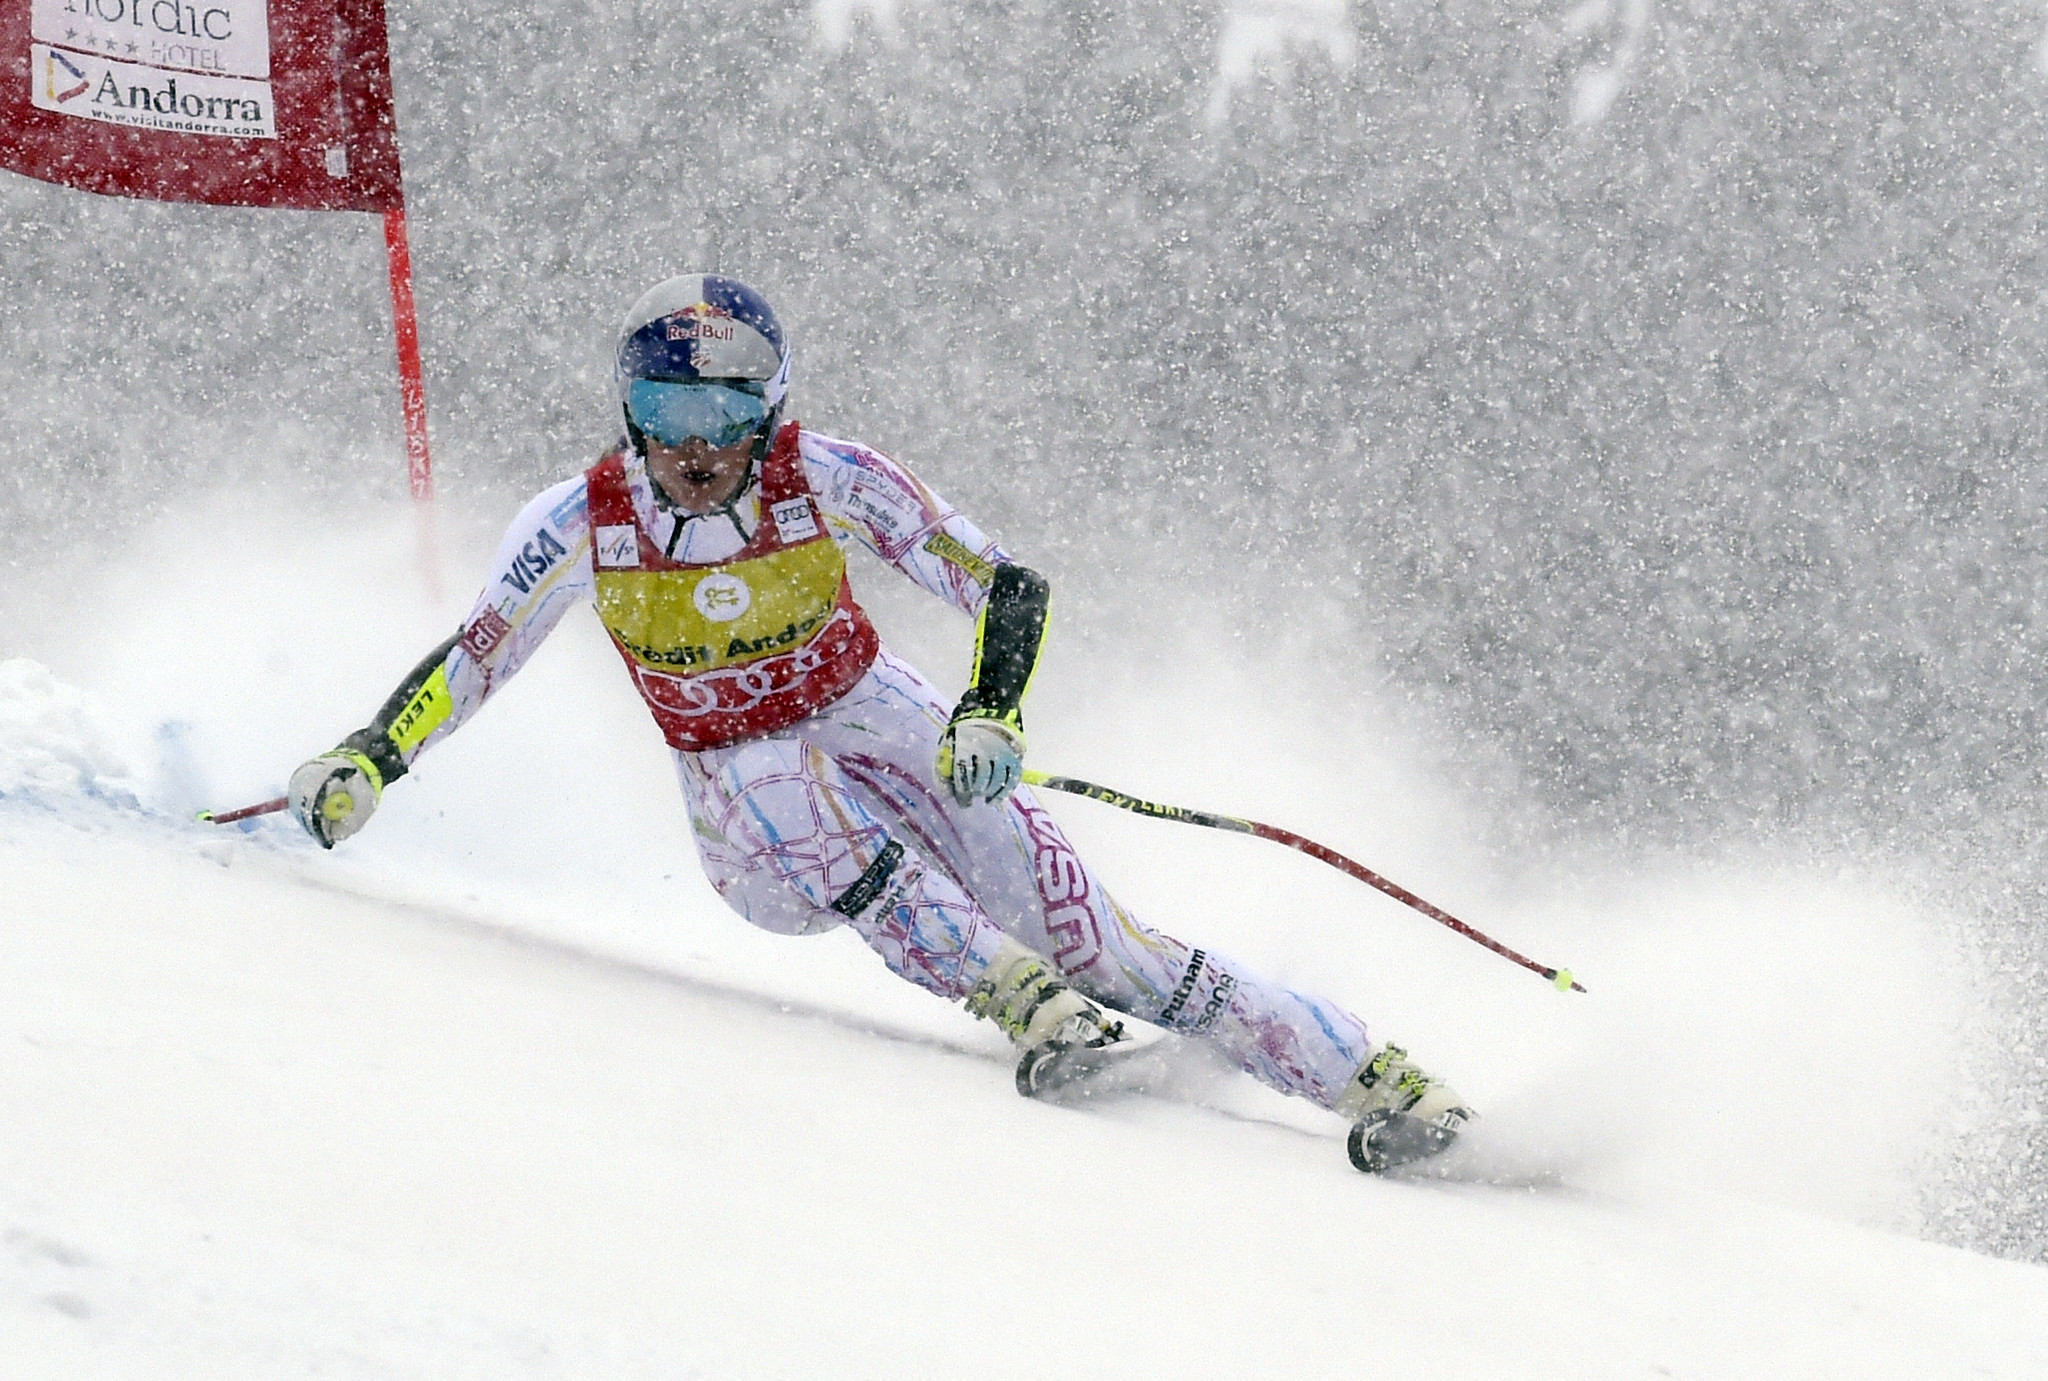 Lindsey Vonn suffers again injury in World Cup race 2